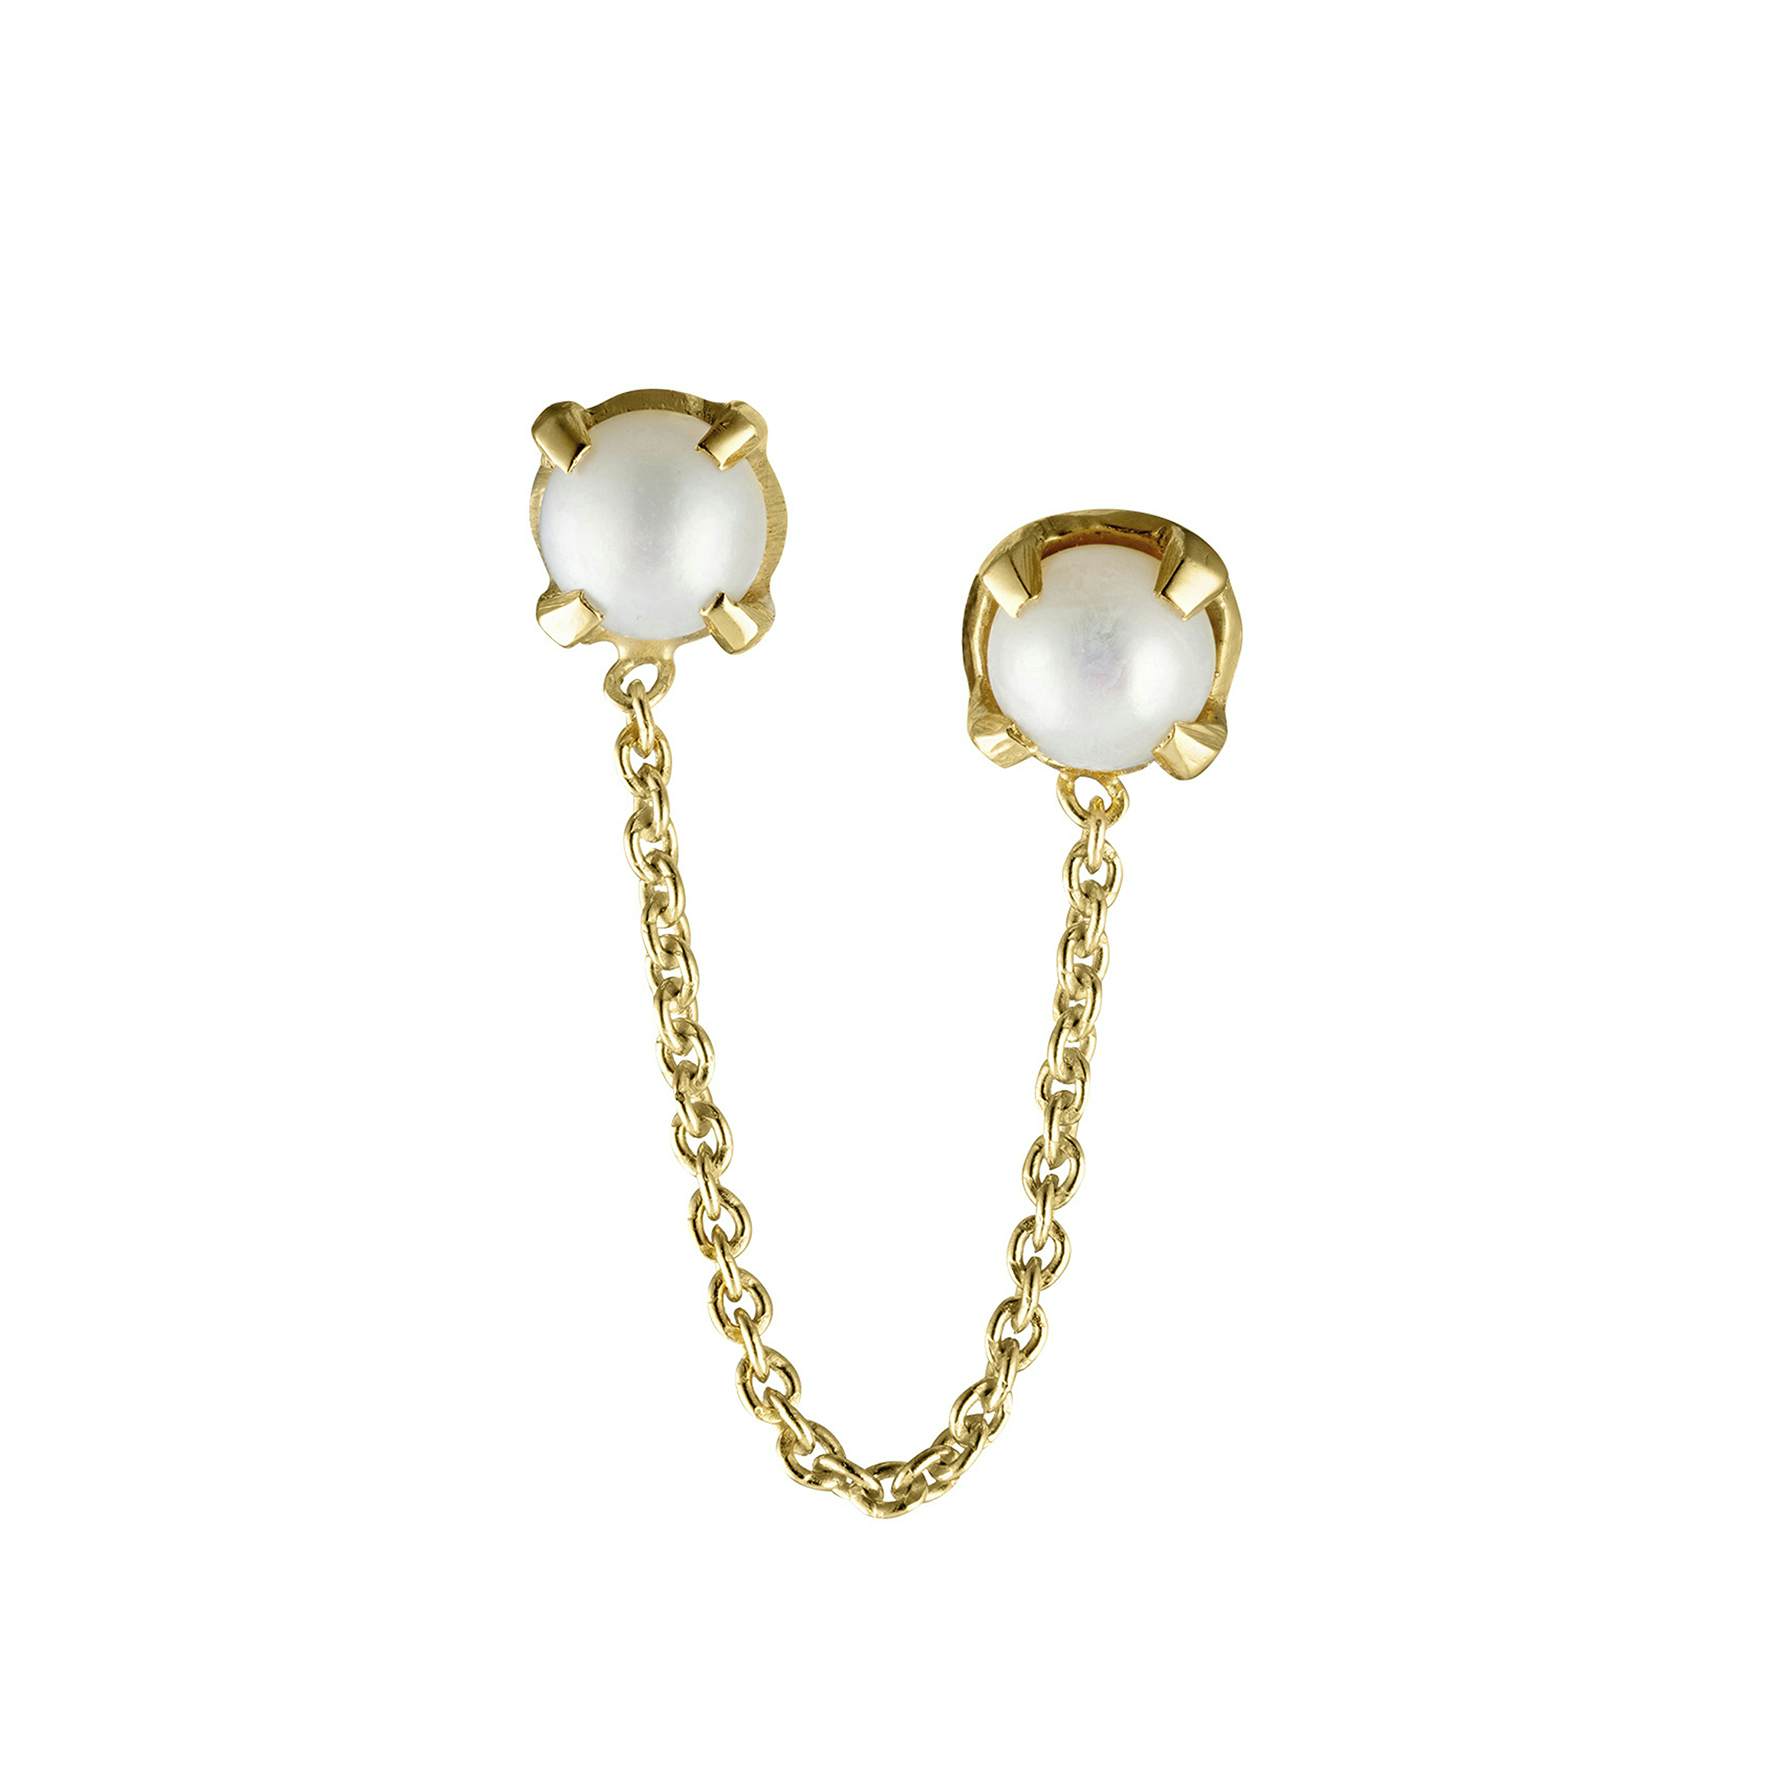 Gem Candy Earring Pearl Jam from Carré in Goldplated-Silver Sterling 925